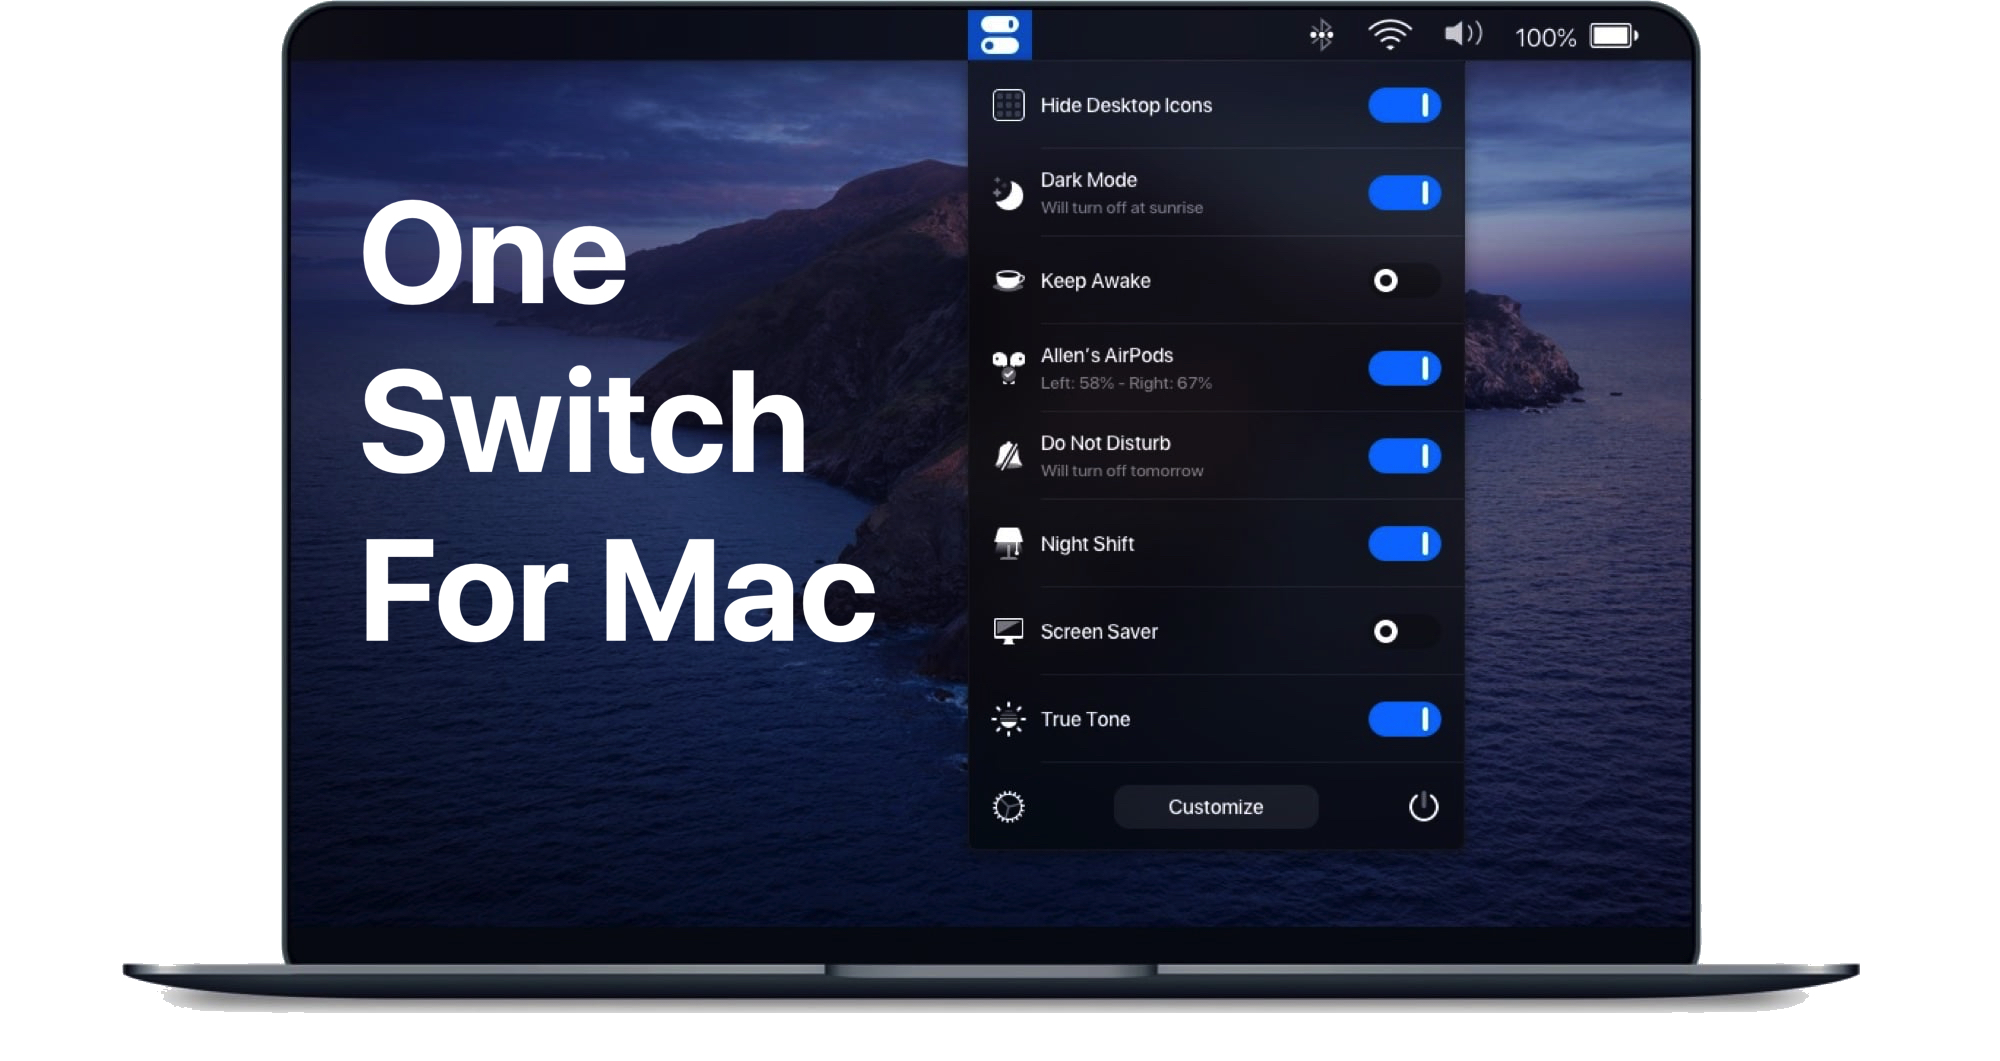  One Switch For Mac Optimizing your work from one spot For Mac